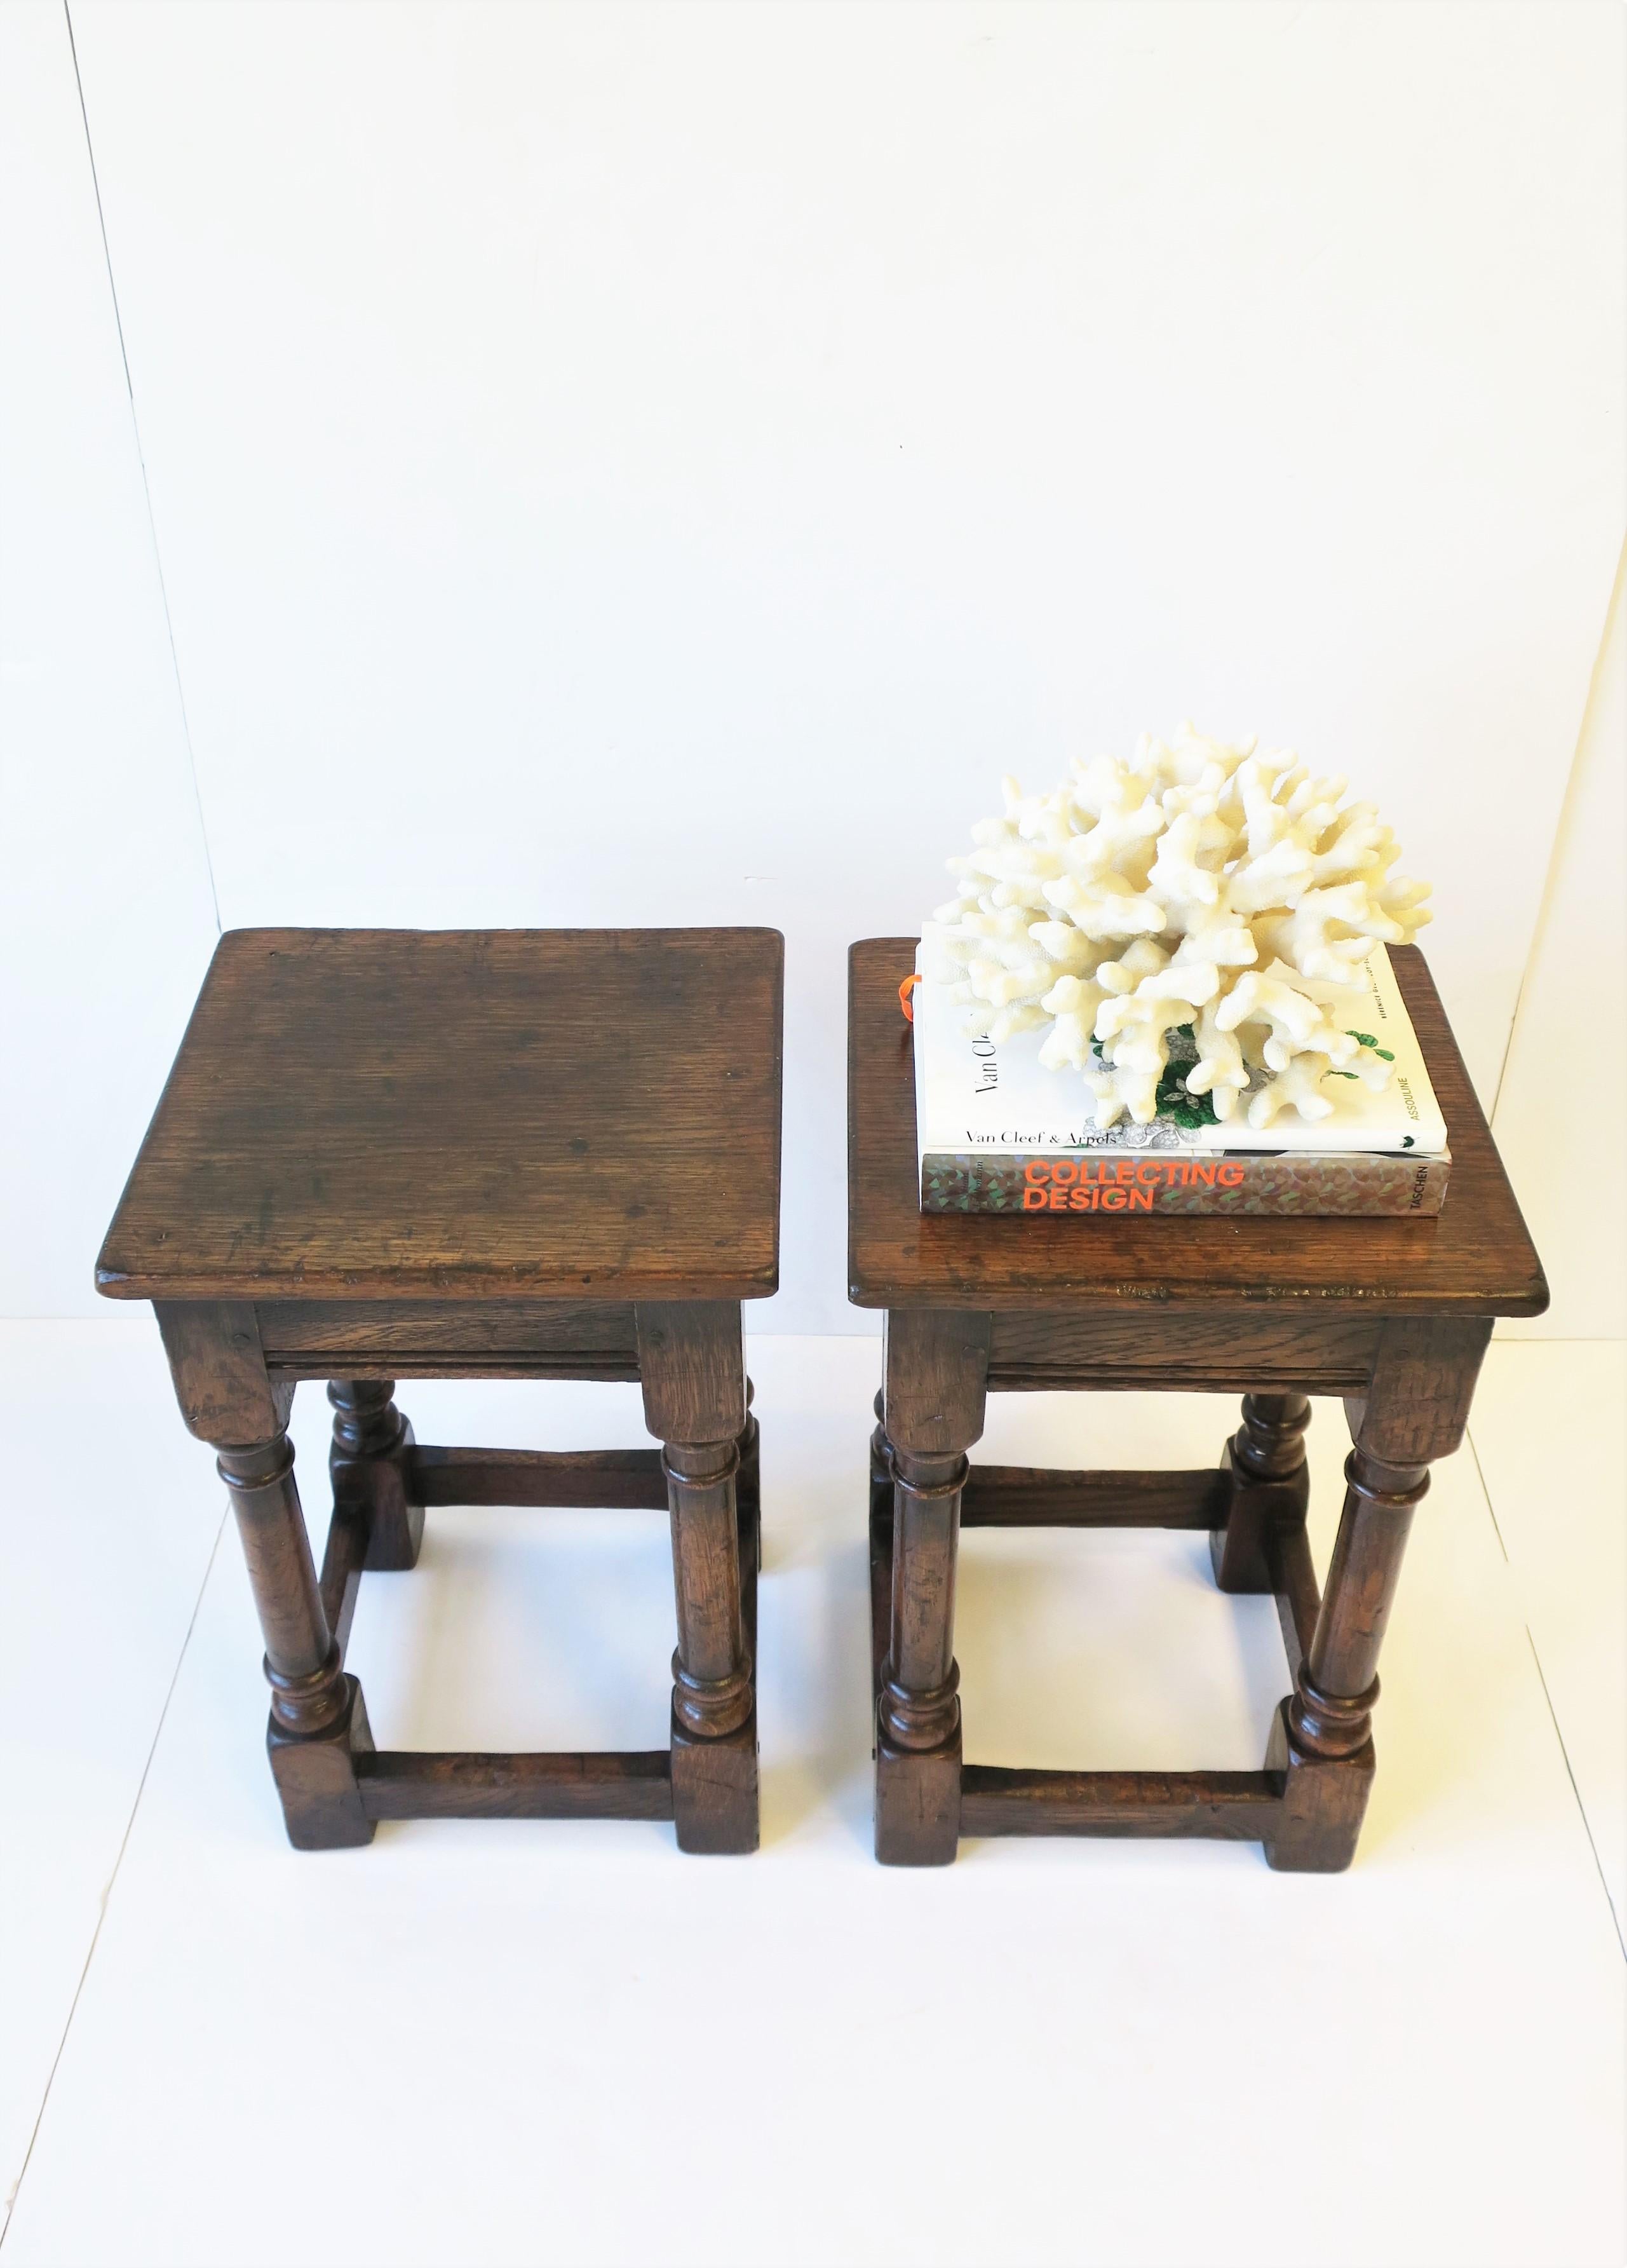 Jacobean Style Wood Side Tables or Stools (Holz)